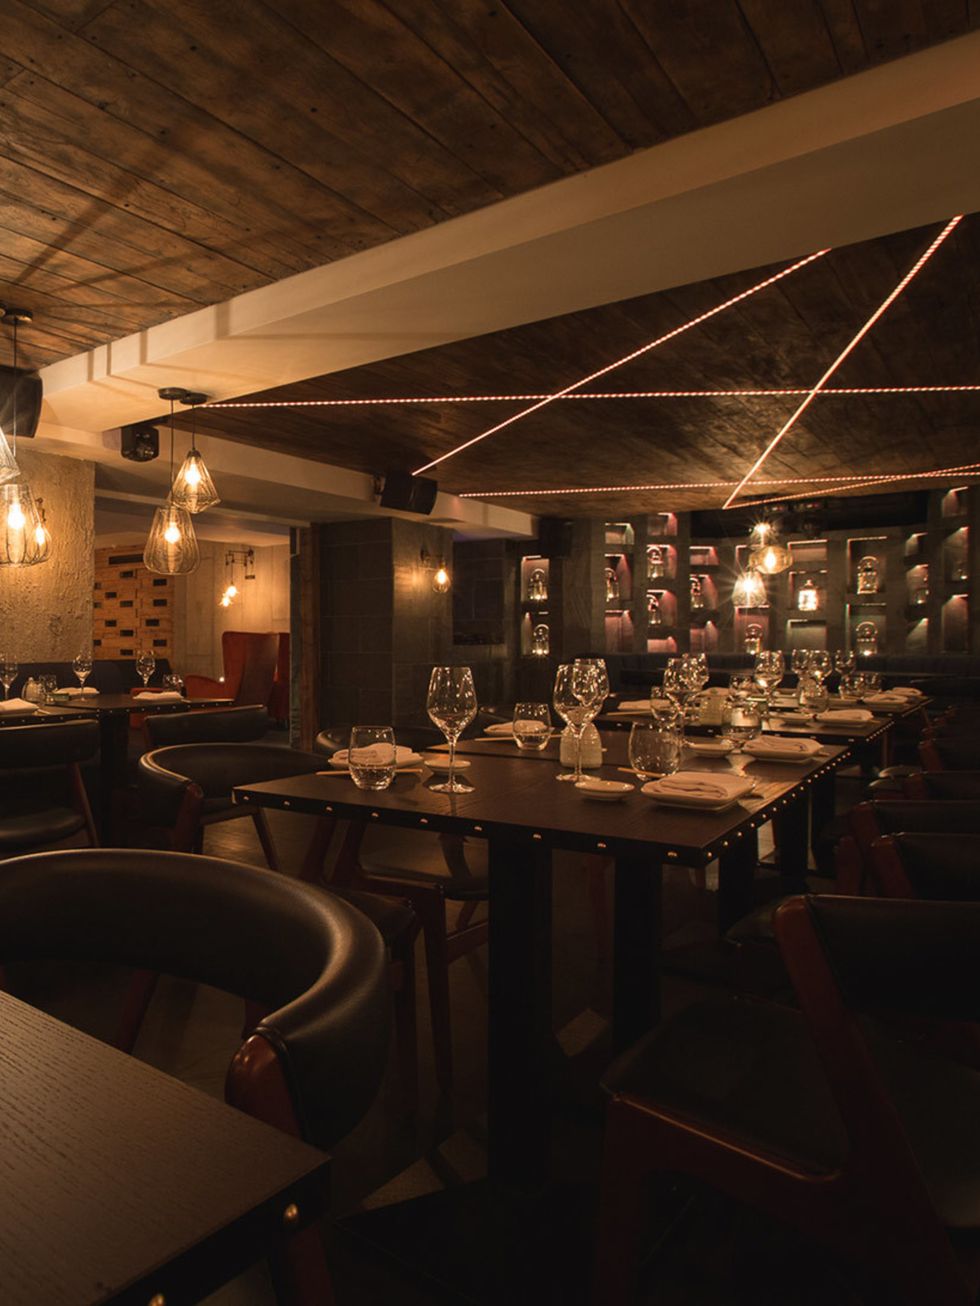 <p><strong>FOOD: RAMUSAKE </strong></p>

<p>Ramusake, a new members restaurant that pairs Japanese cuisine with a party vibe, has landed on Old Brompton Road and is set to take South Ken by storm.</p>

<p>Scott Hallsworth, the ex-head chef of Nobu and che